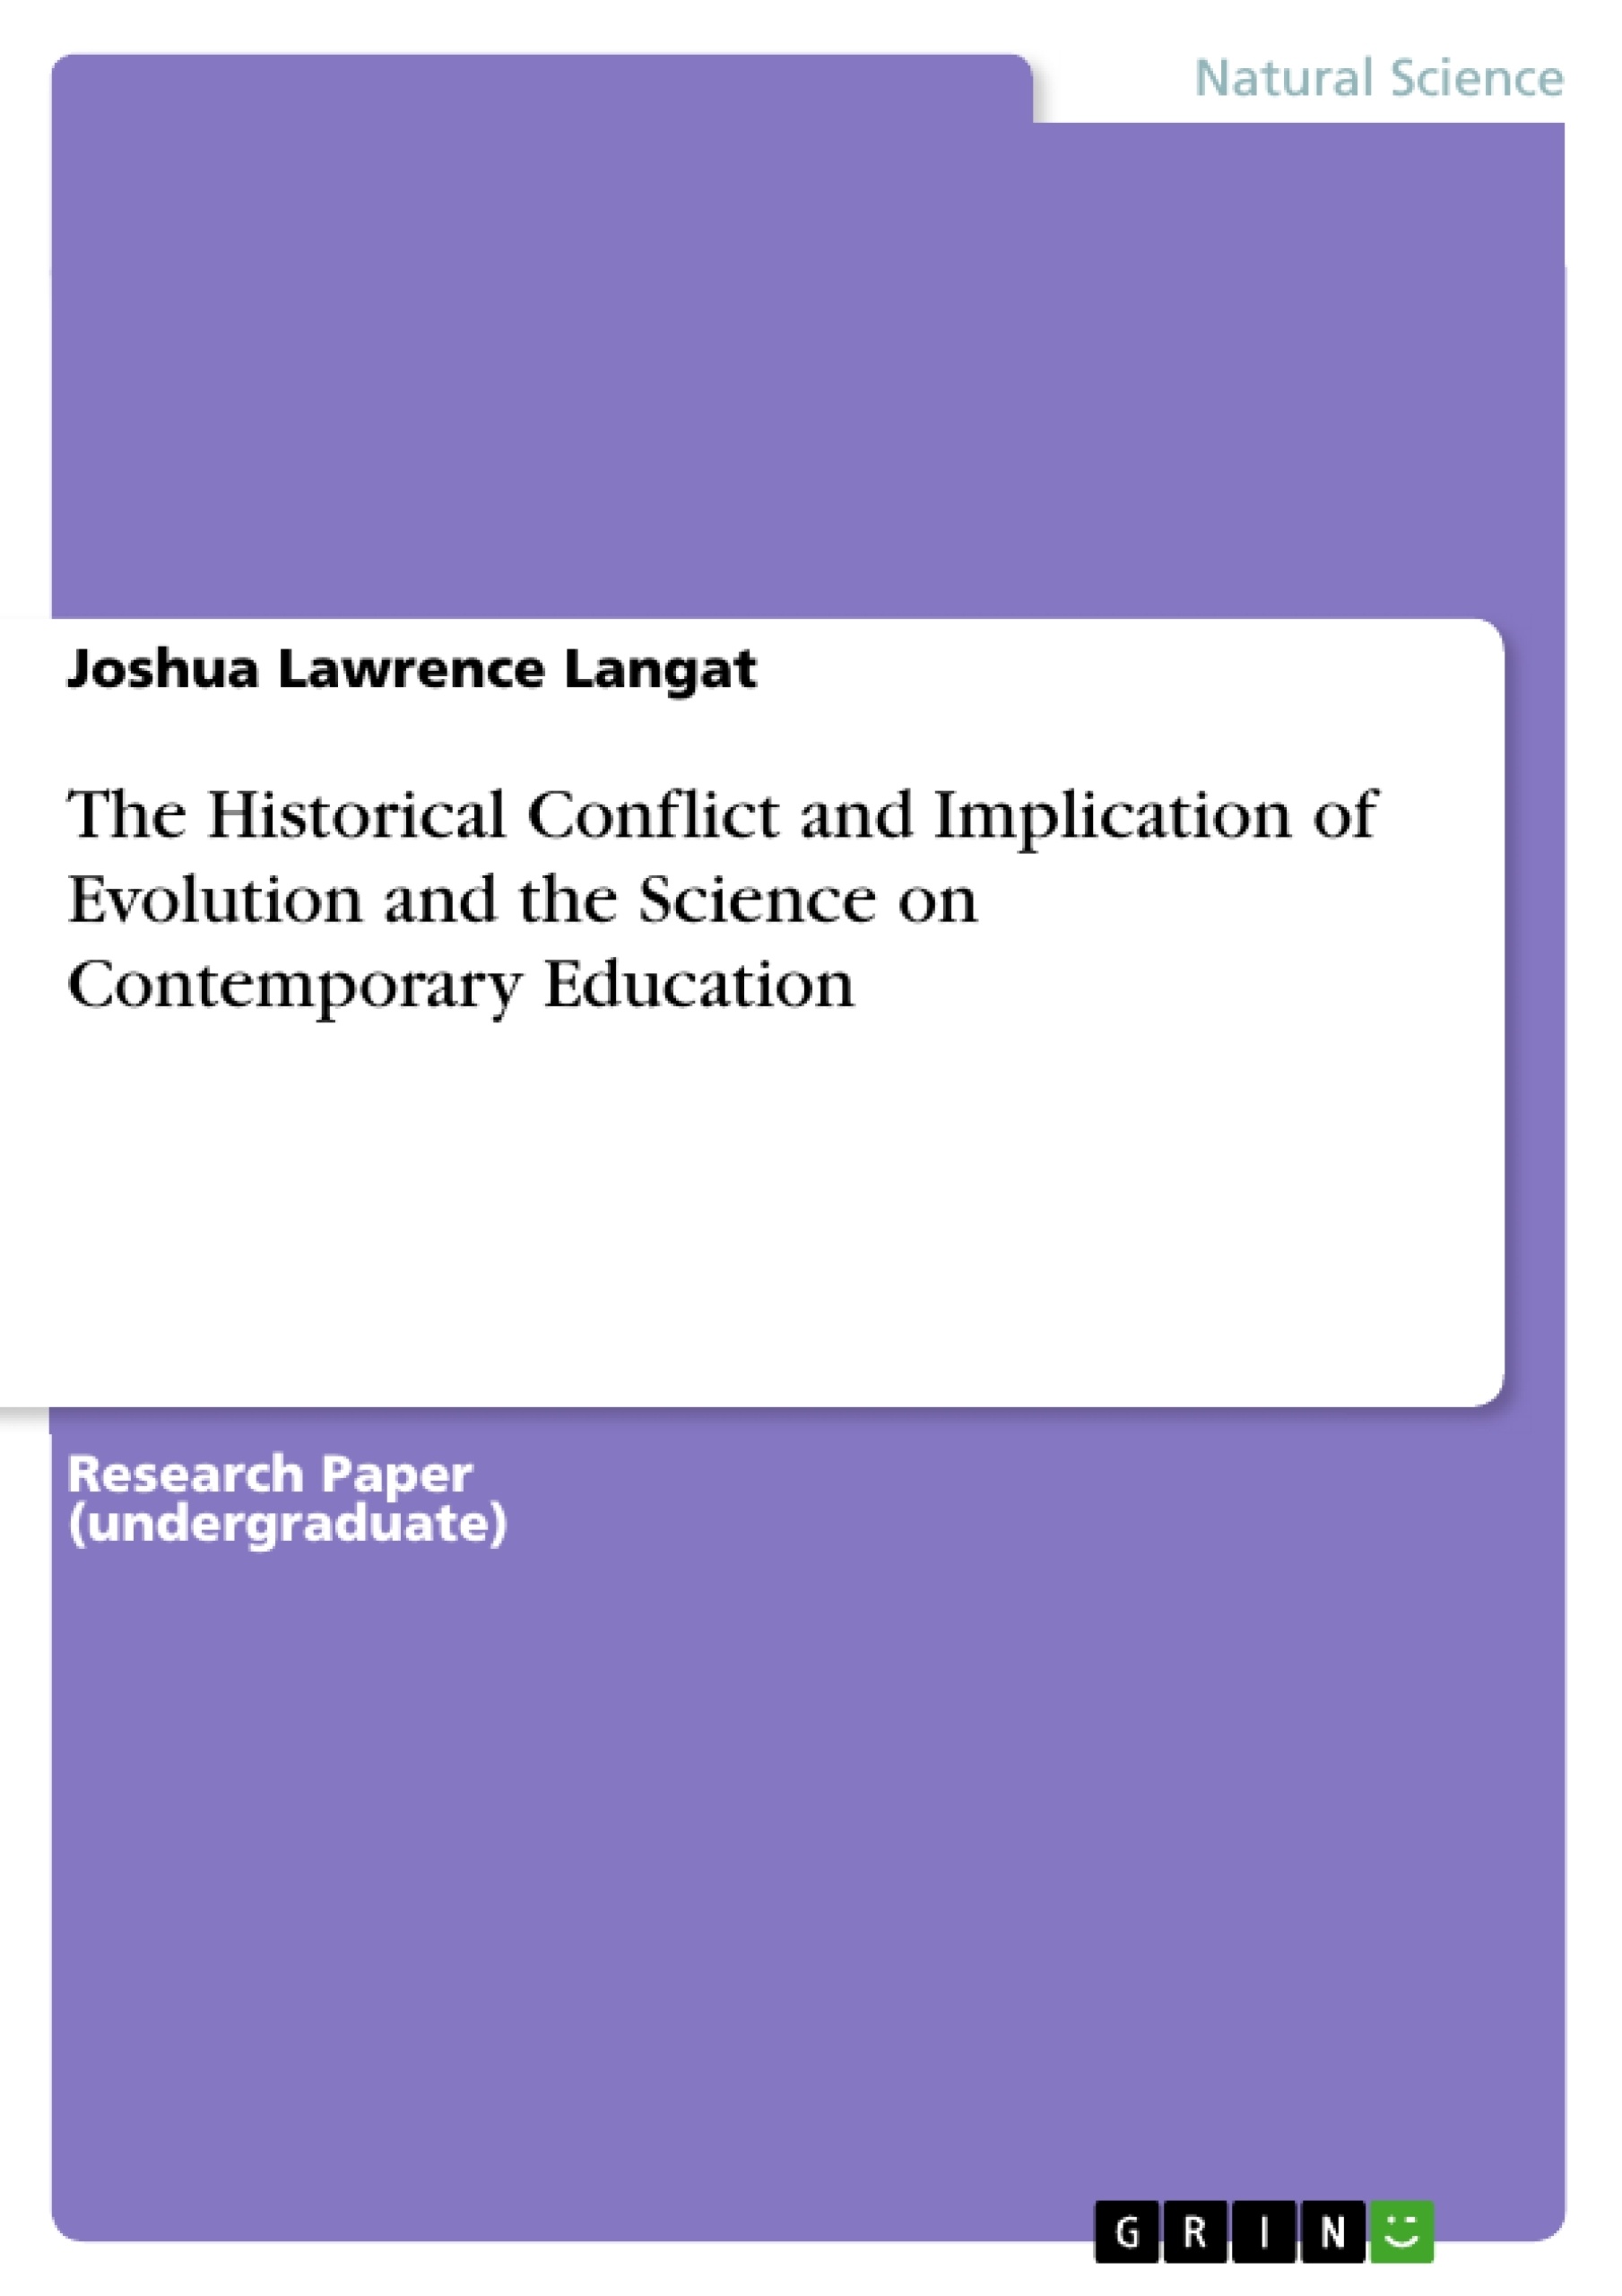 Title: The Historical Conflict and Implication of Evolution and the Science on Contemporary Education